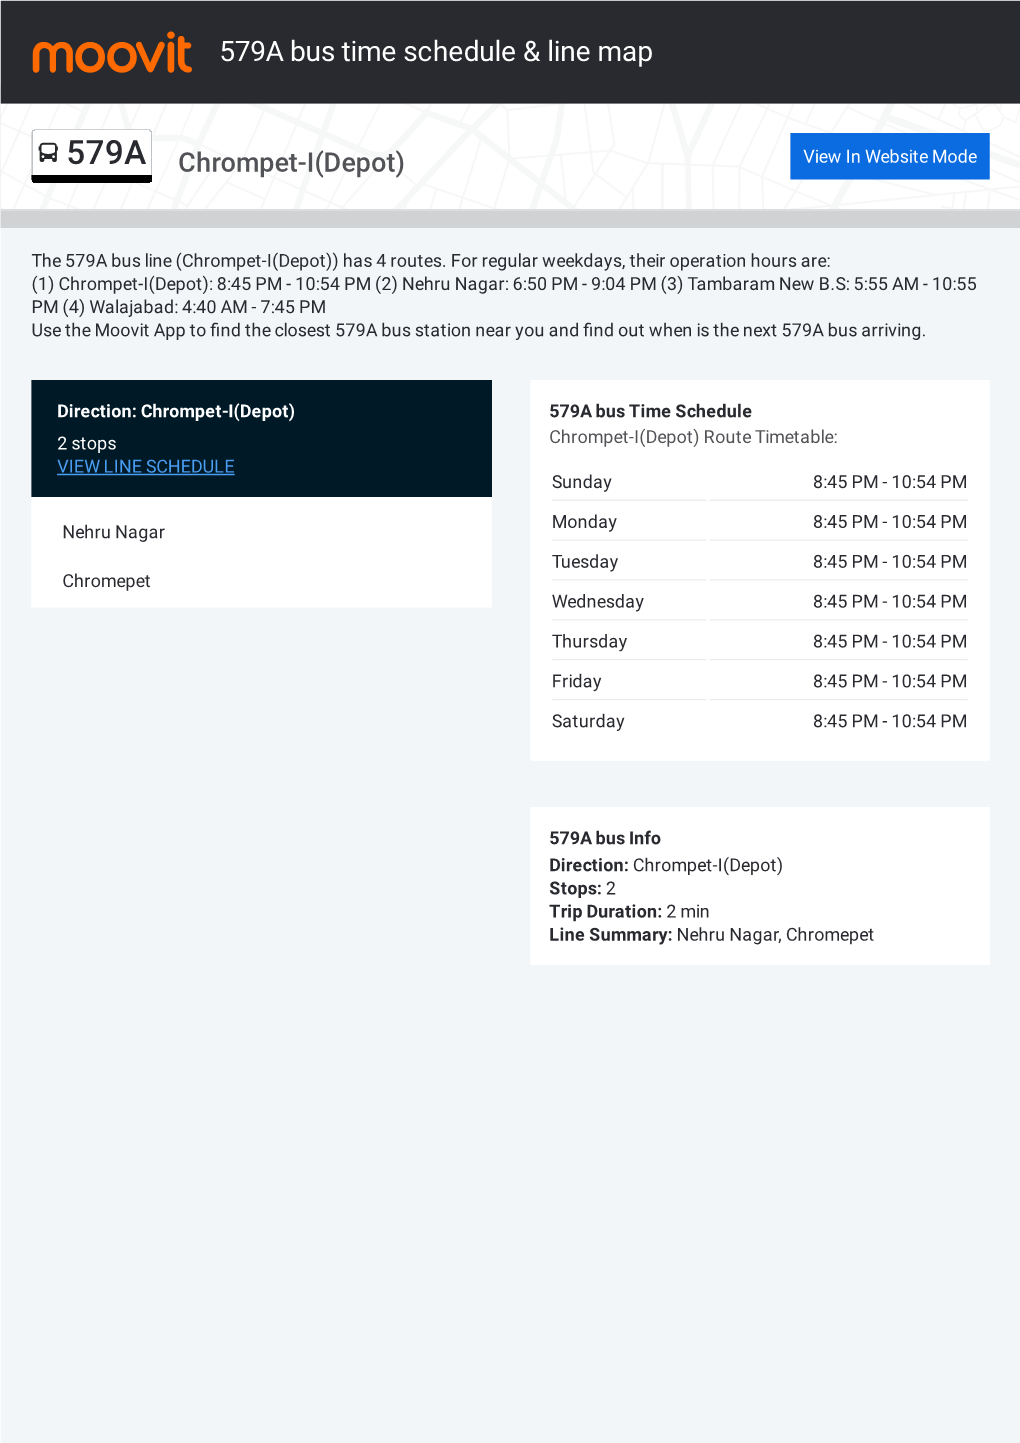 579A Bus Time Schedule & Line Route